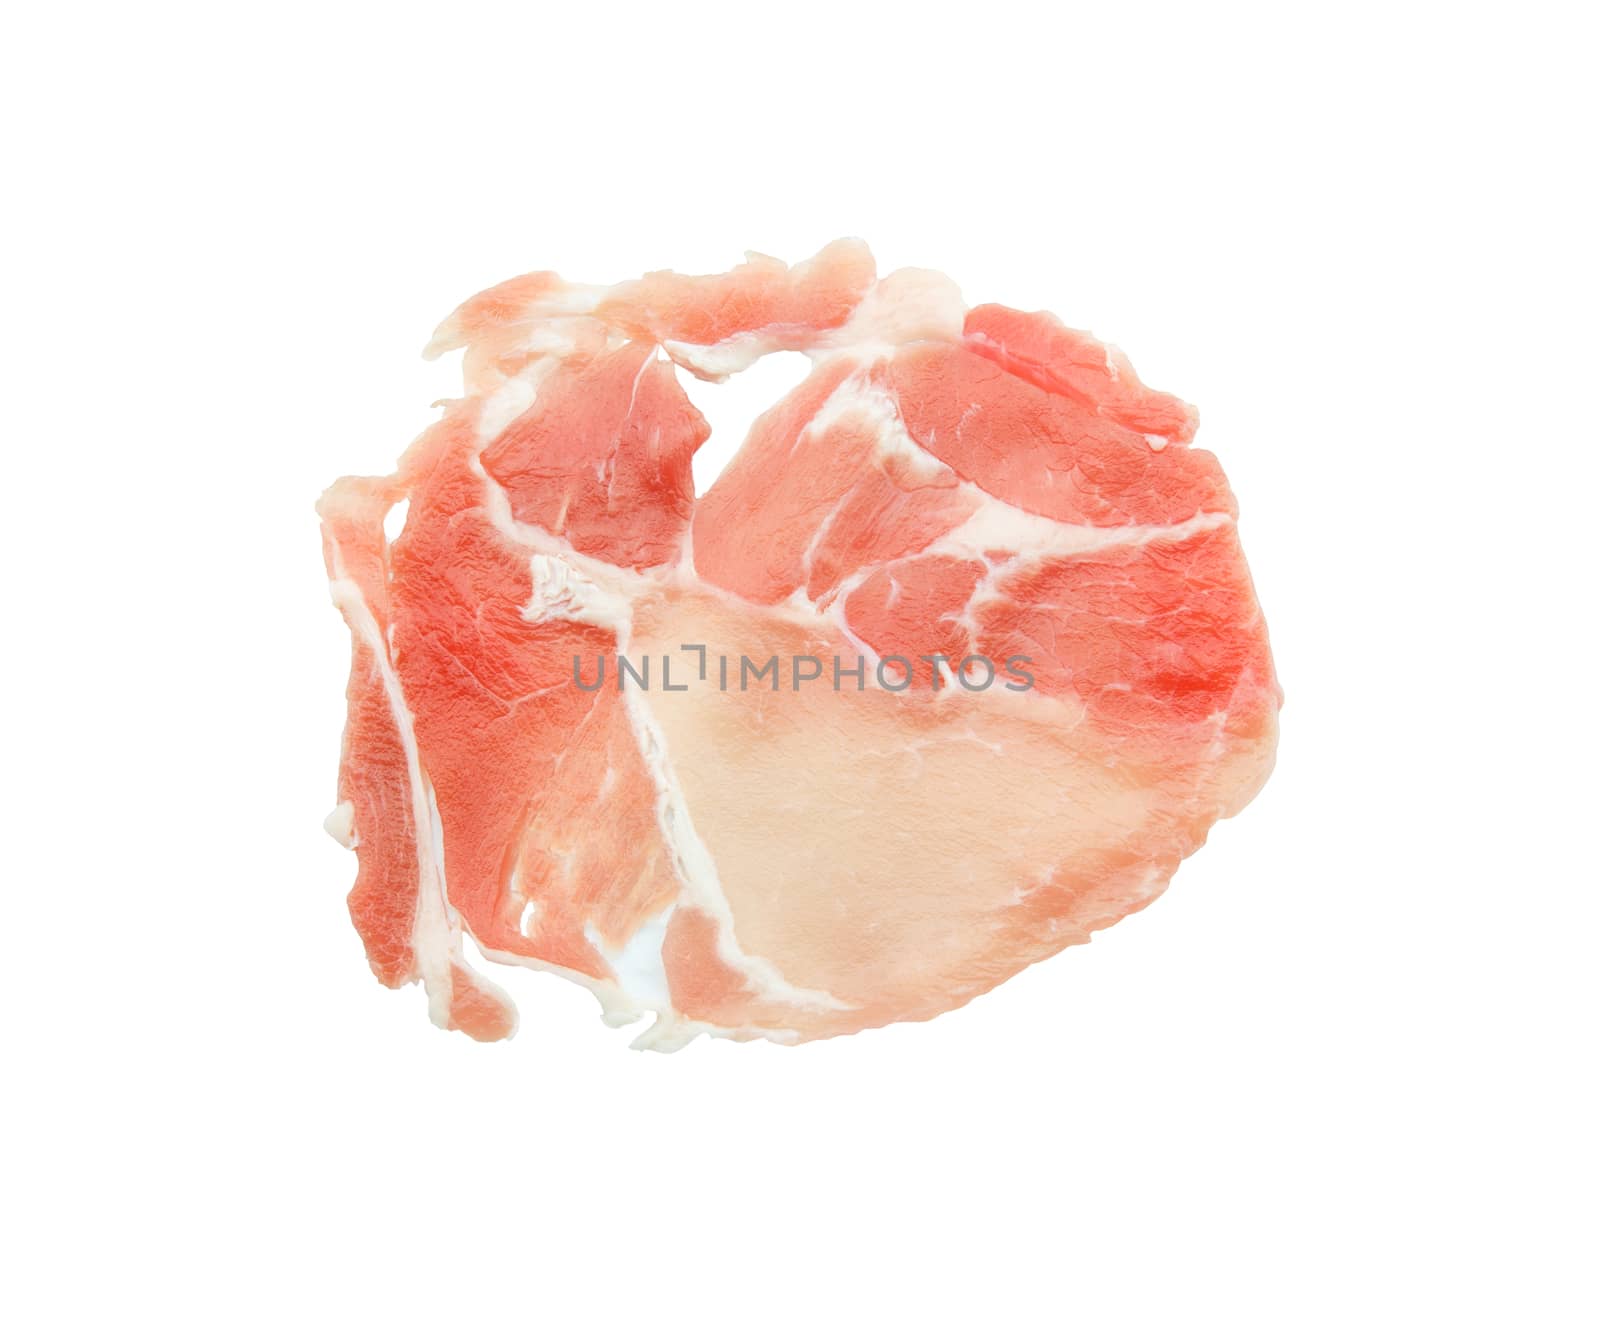 Sliced pork isolated on white background by vitawin